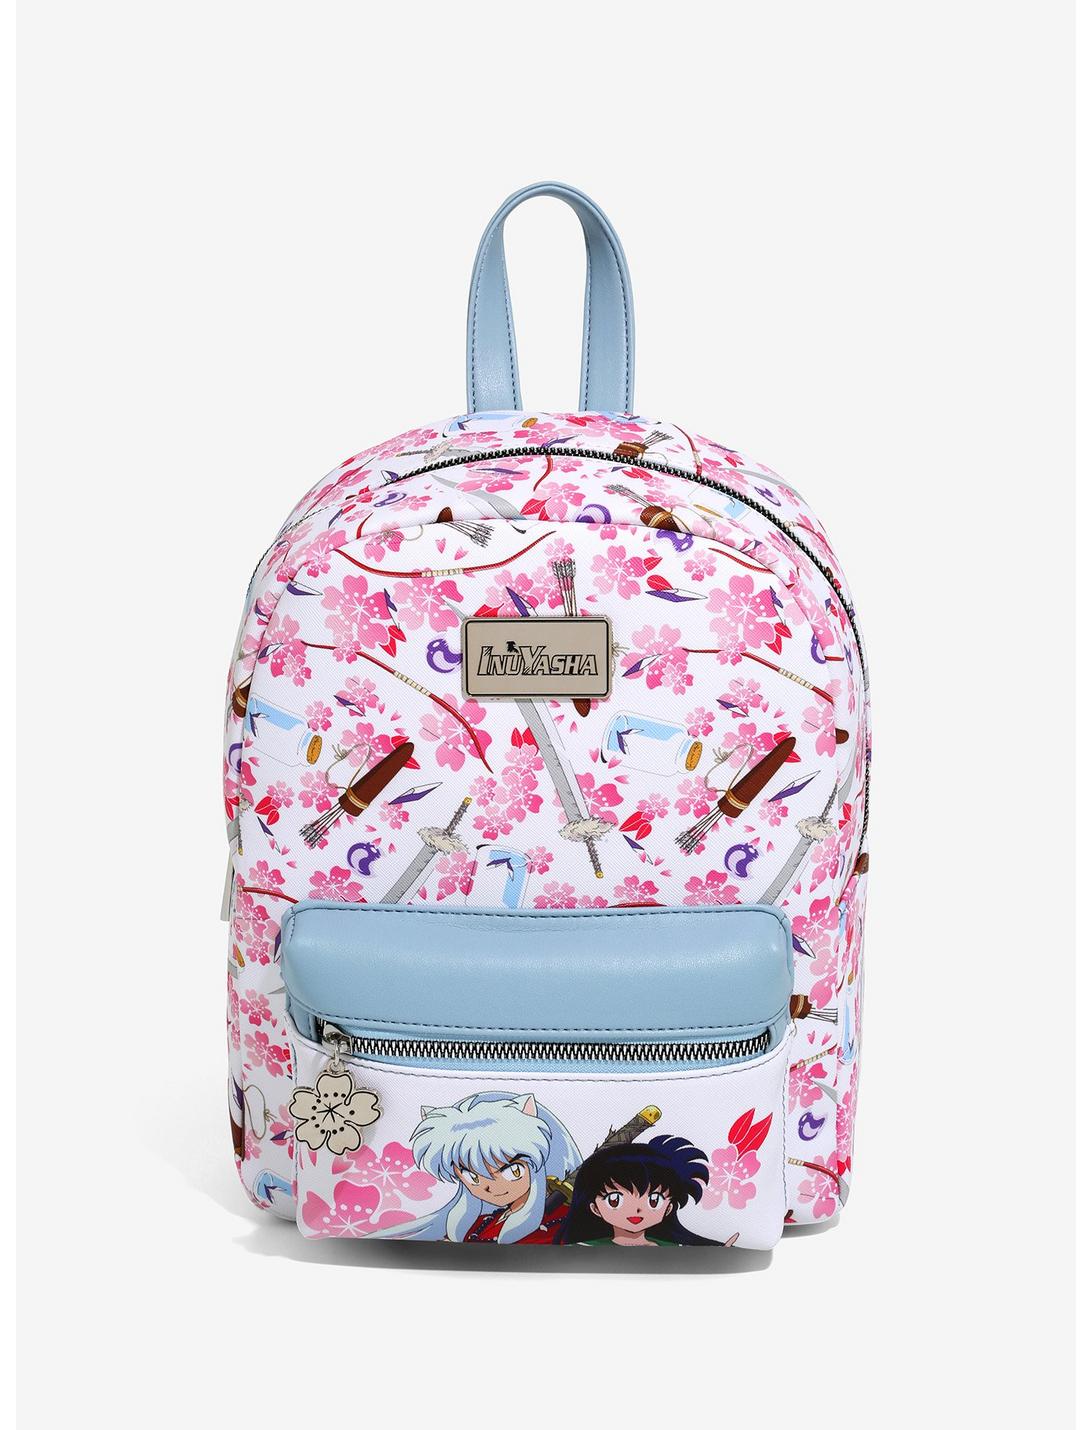 InuYasha Cherry Blossoms & Items Mini Backpack